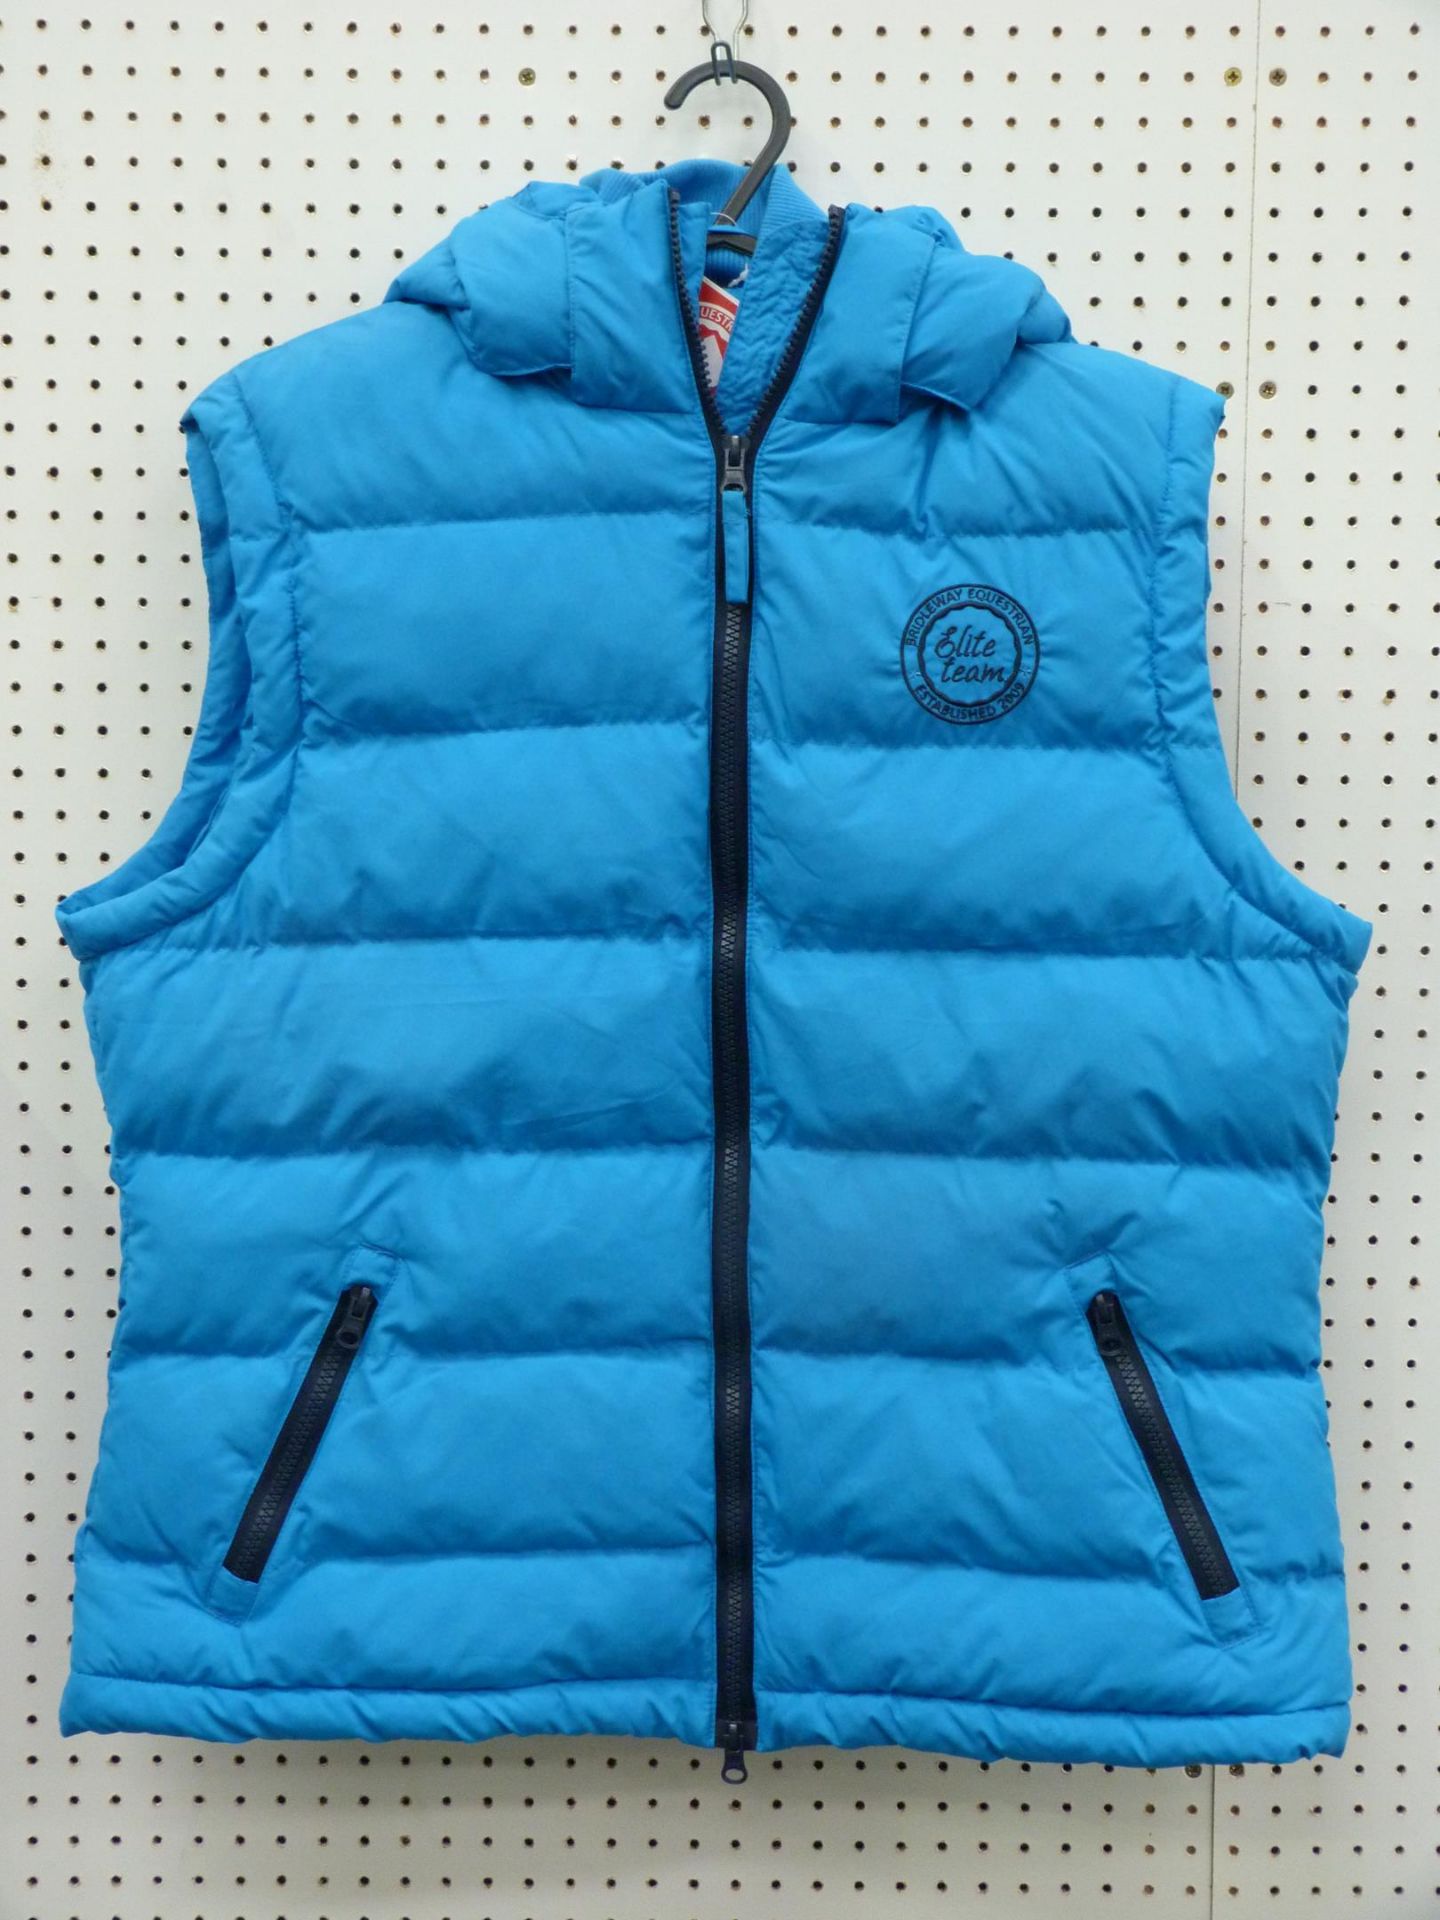 * Three Blue, New Bridleway Gilets; each X Large with Hood. RRP £105 (3)